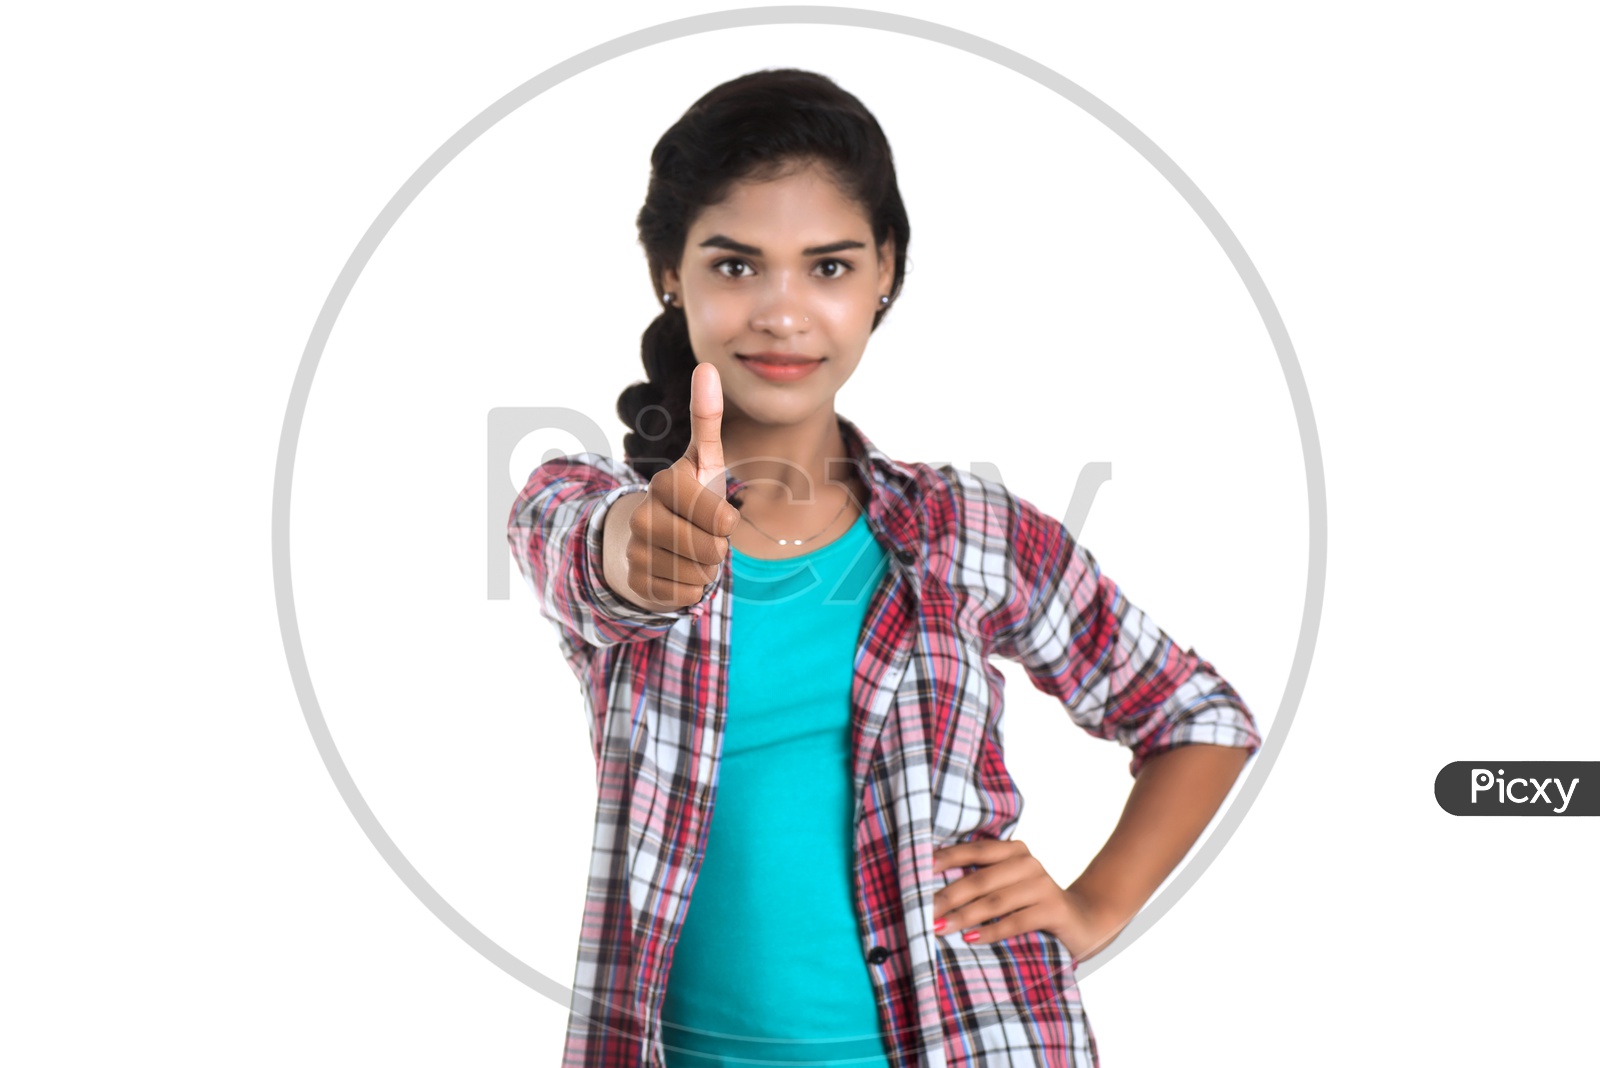 Portrait of a Pretty Young Woman with Gestures and Expressions  Posing Over a White Background